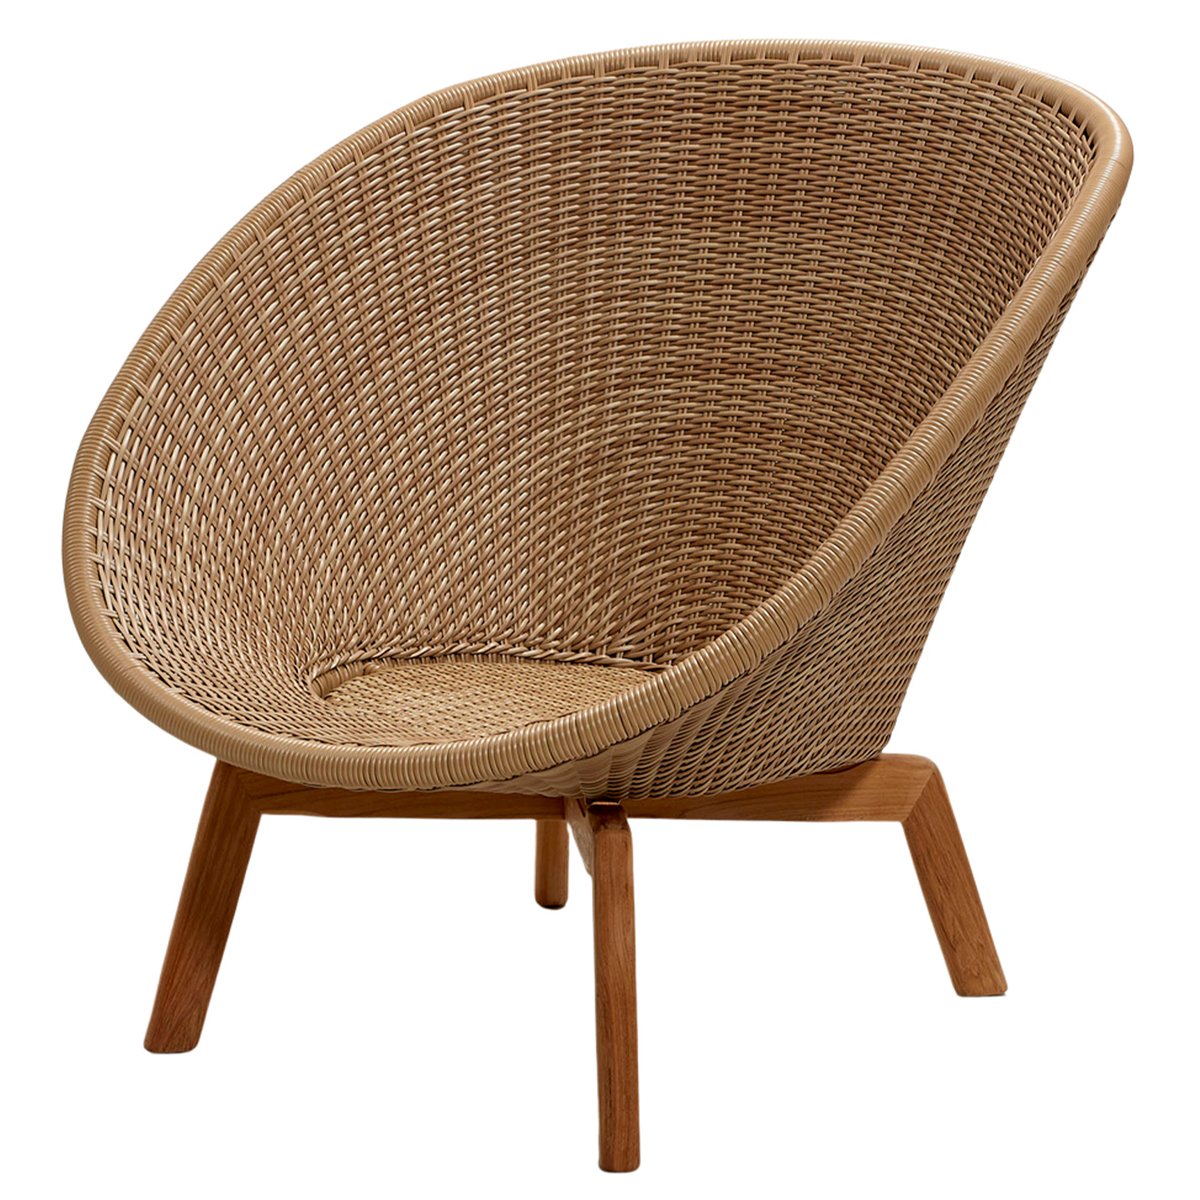 Cane Line Pea Lounge Chair Teak, Outdoor Round Wicker Lounge Chair